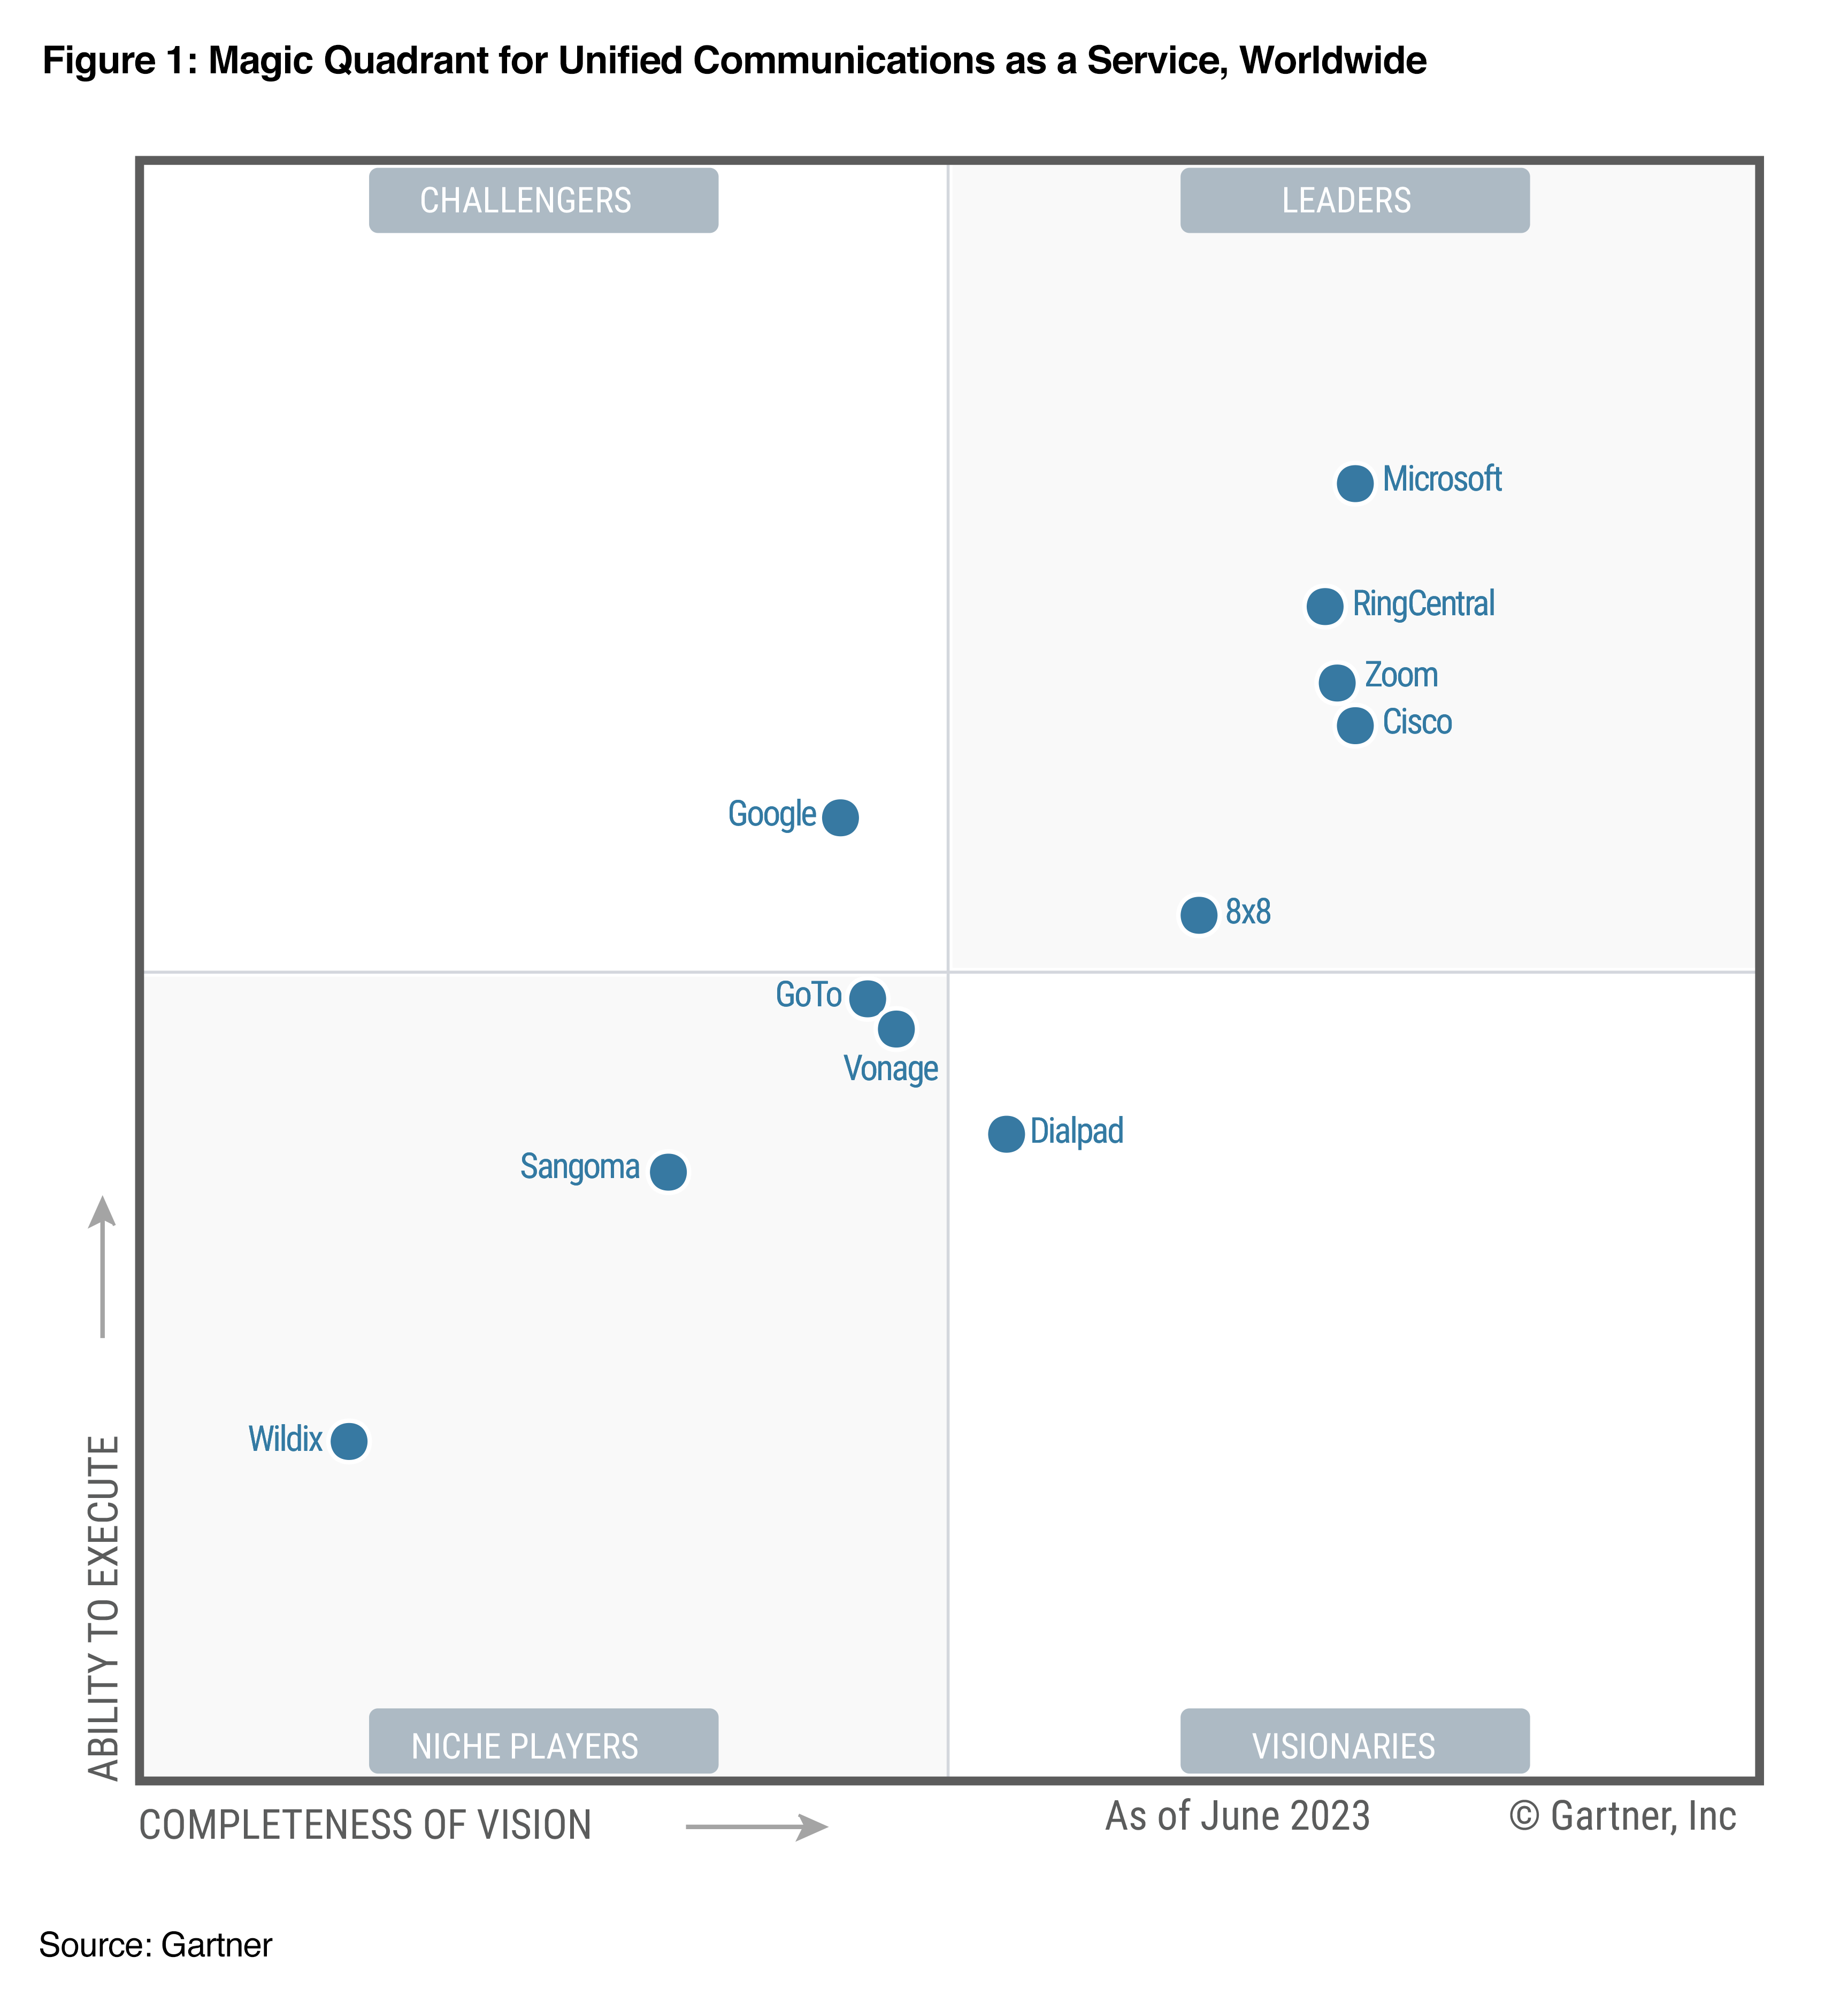 Gartner’s Magic Quadrant for unified communications as a service places Webex by Cisco in a leader position for the fifth consecutive year.